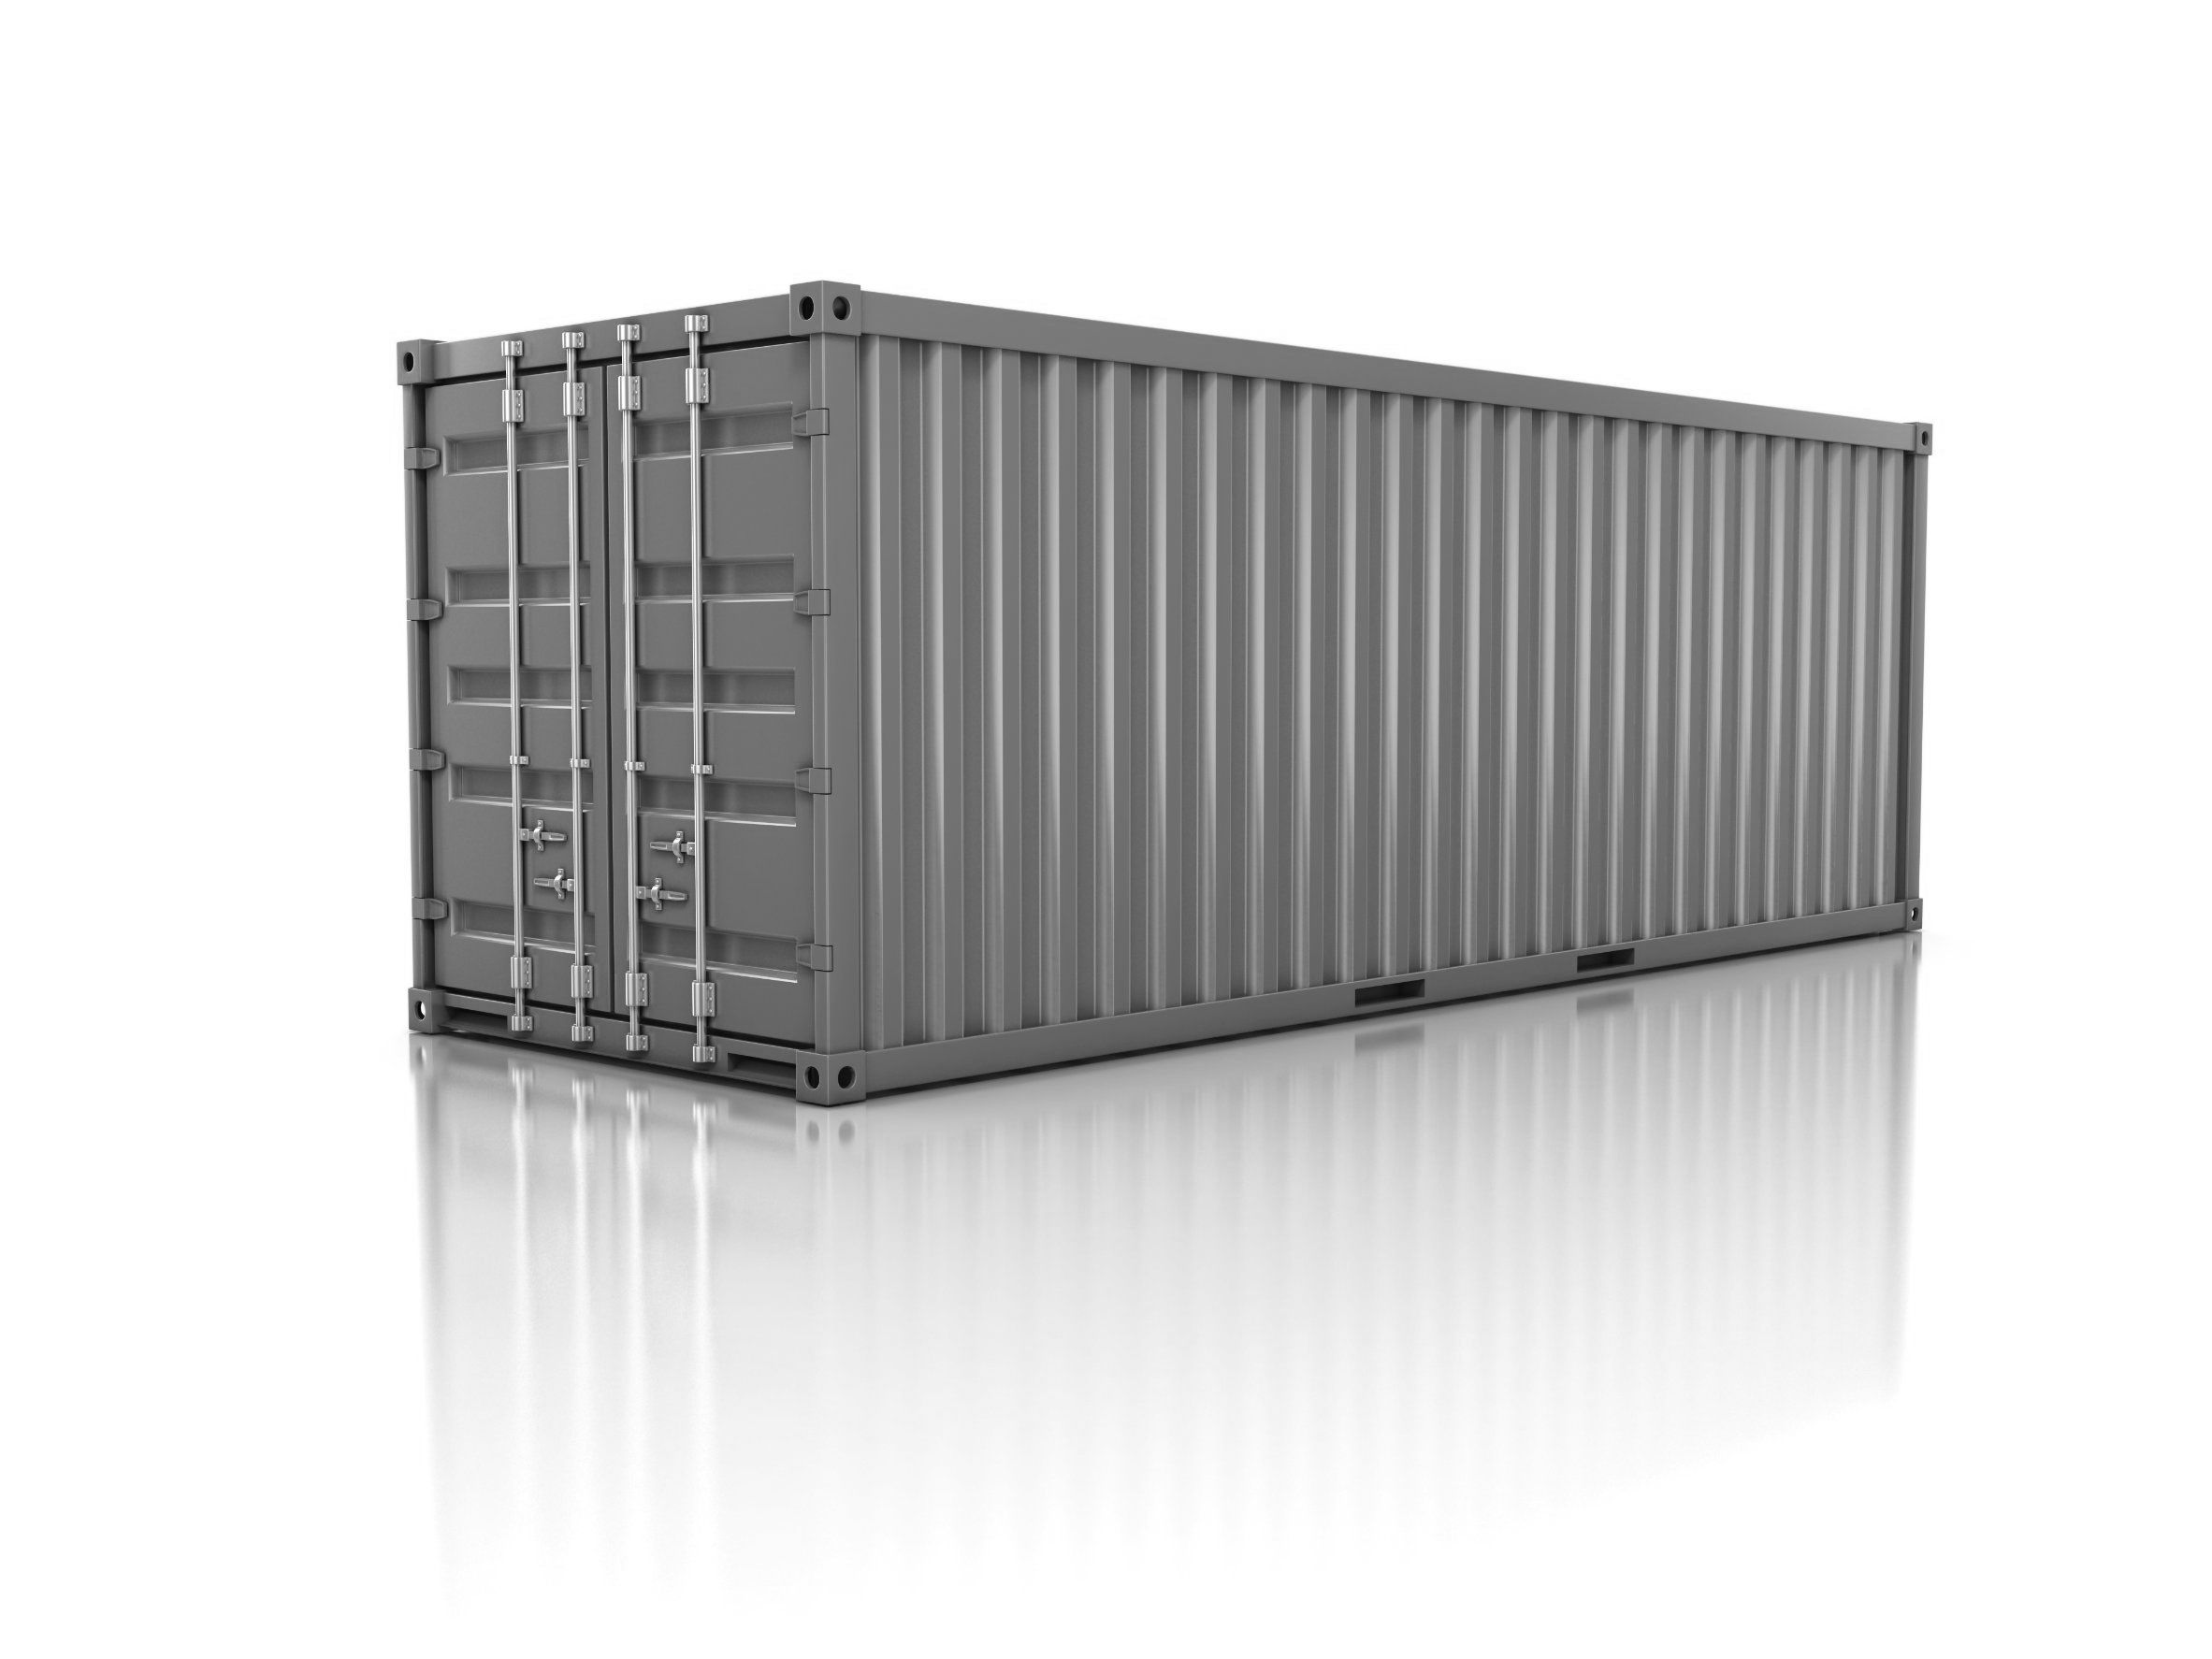 5 Different Uses of Storage Containers